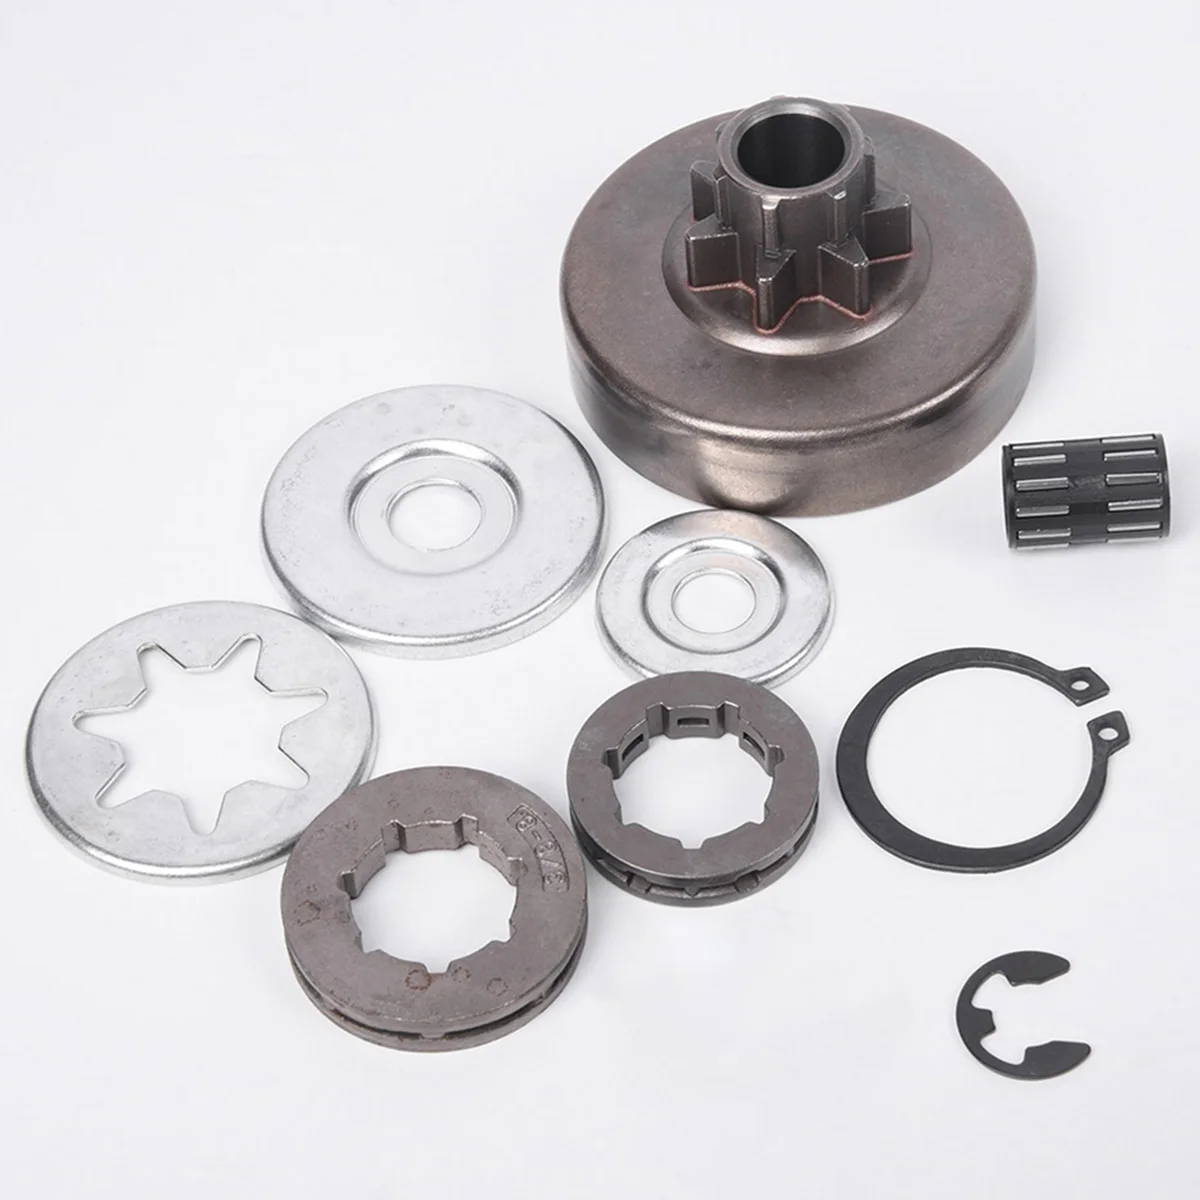 replacement sprocket clutch washer for most Stihl chainsaws 